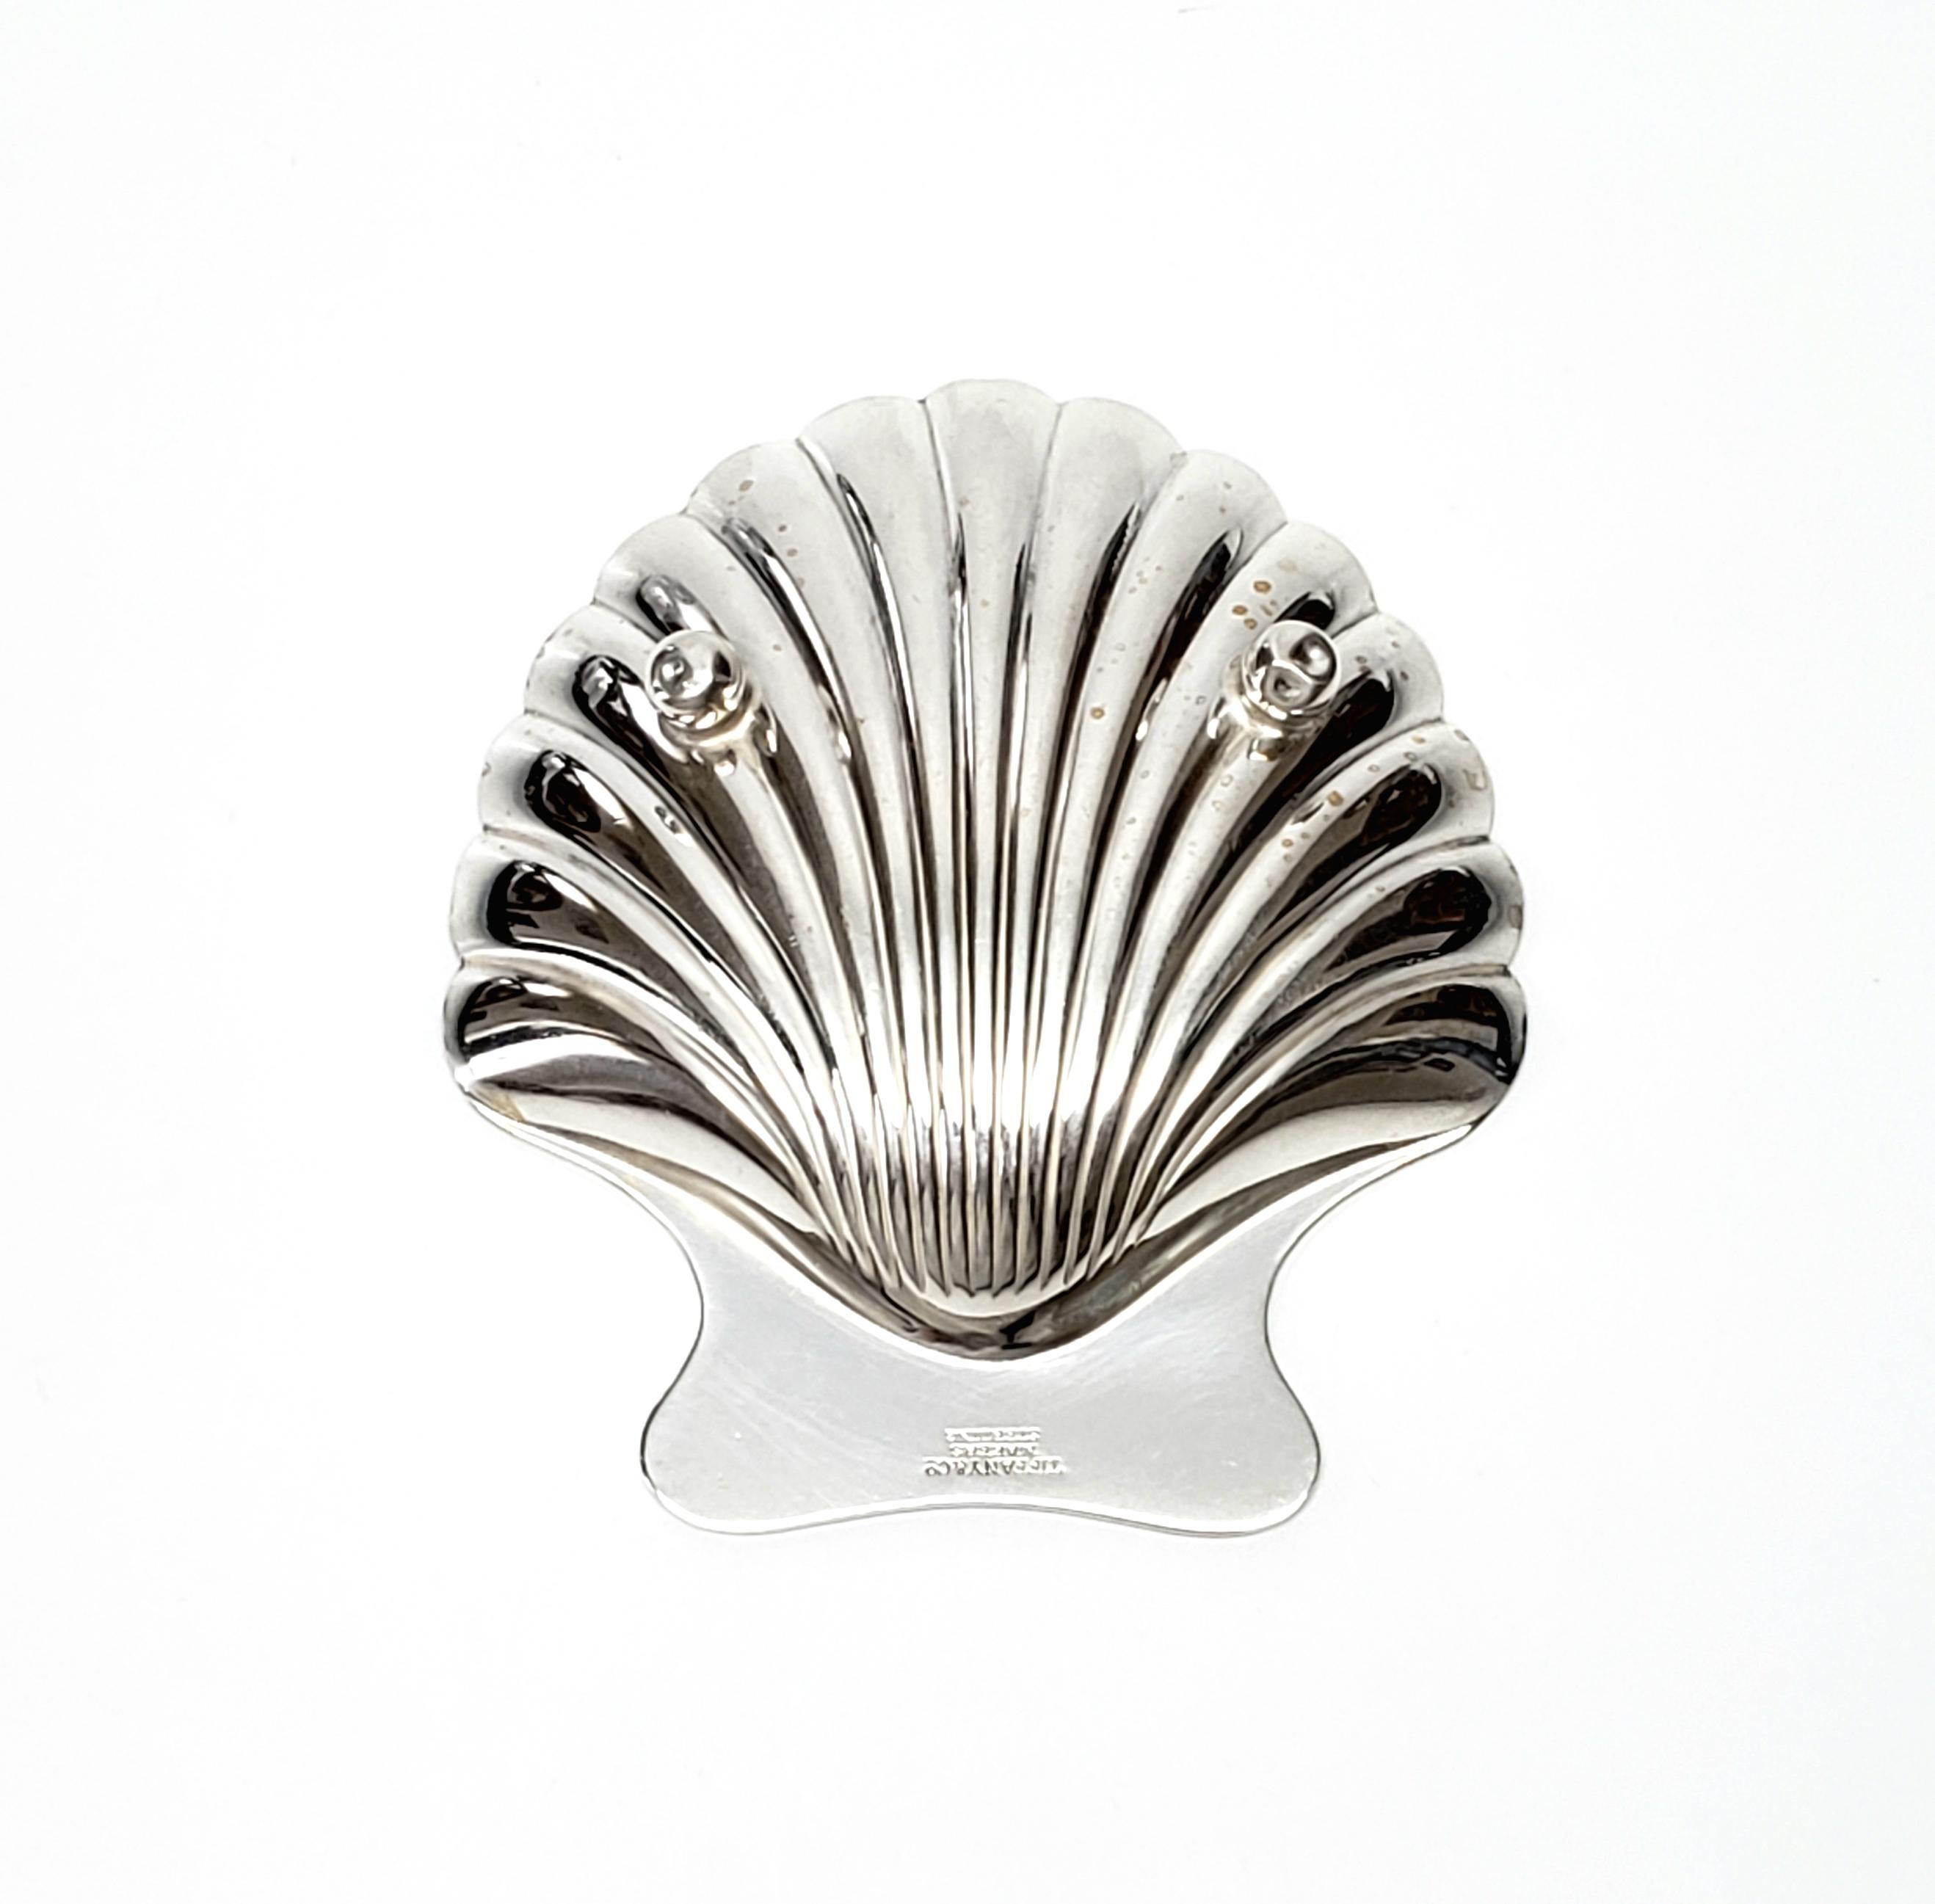 Vintage sterling silver Tiffany & Co. shell bowl.

This beautiful bowl can be used for nuts, candy or even small pieces of jewelry.

Measures approximate 2 7/8